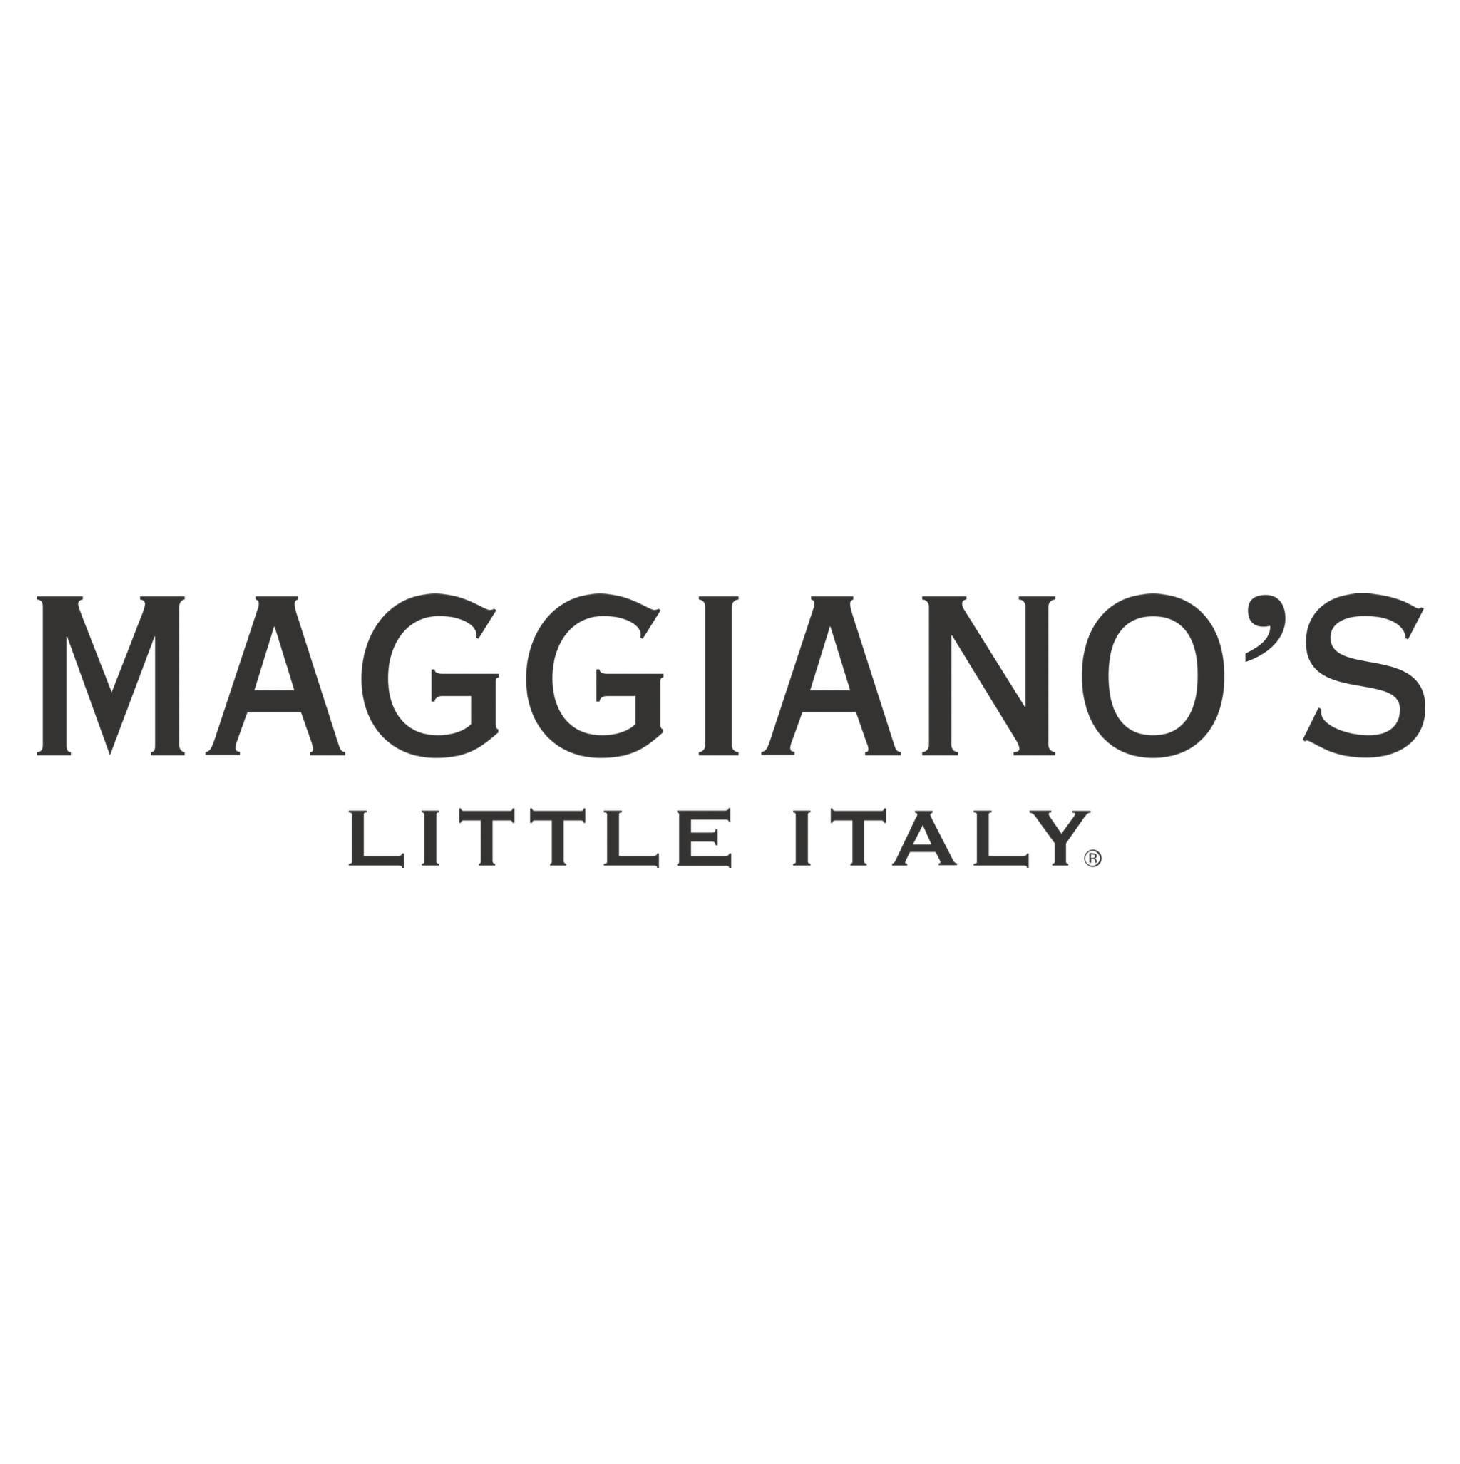 Maggianos Little Italy logo